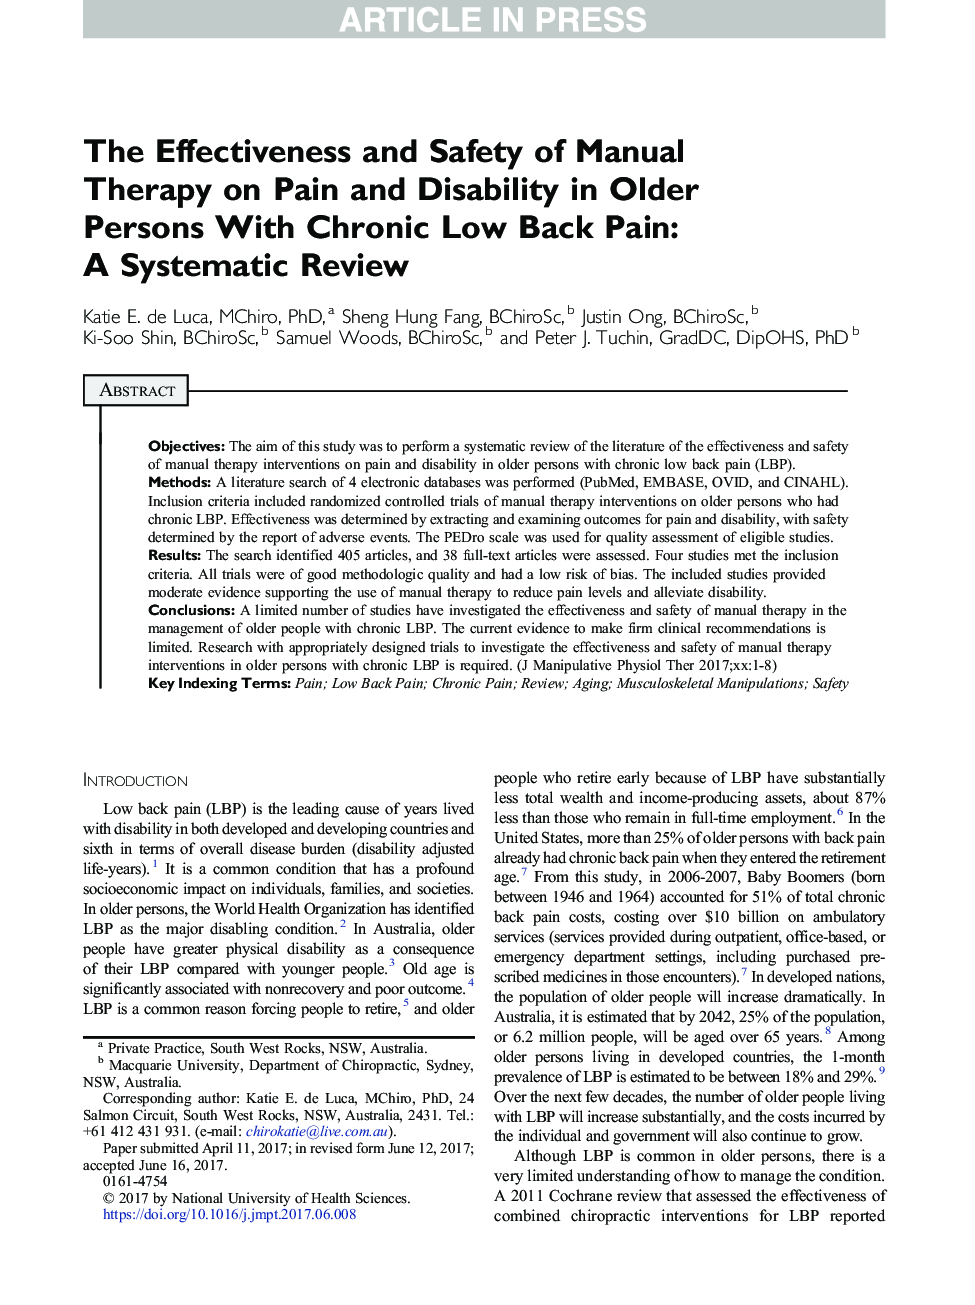 The Effectiveness and Safety of Manual Therapy on Pain and Disability in Older Persons With Chronic Low Back Pain: A Systematic Review